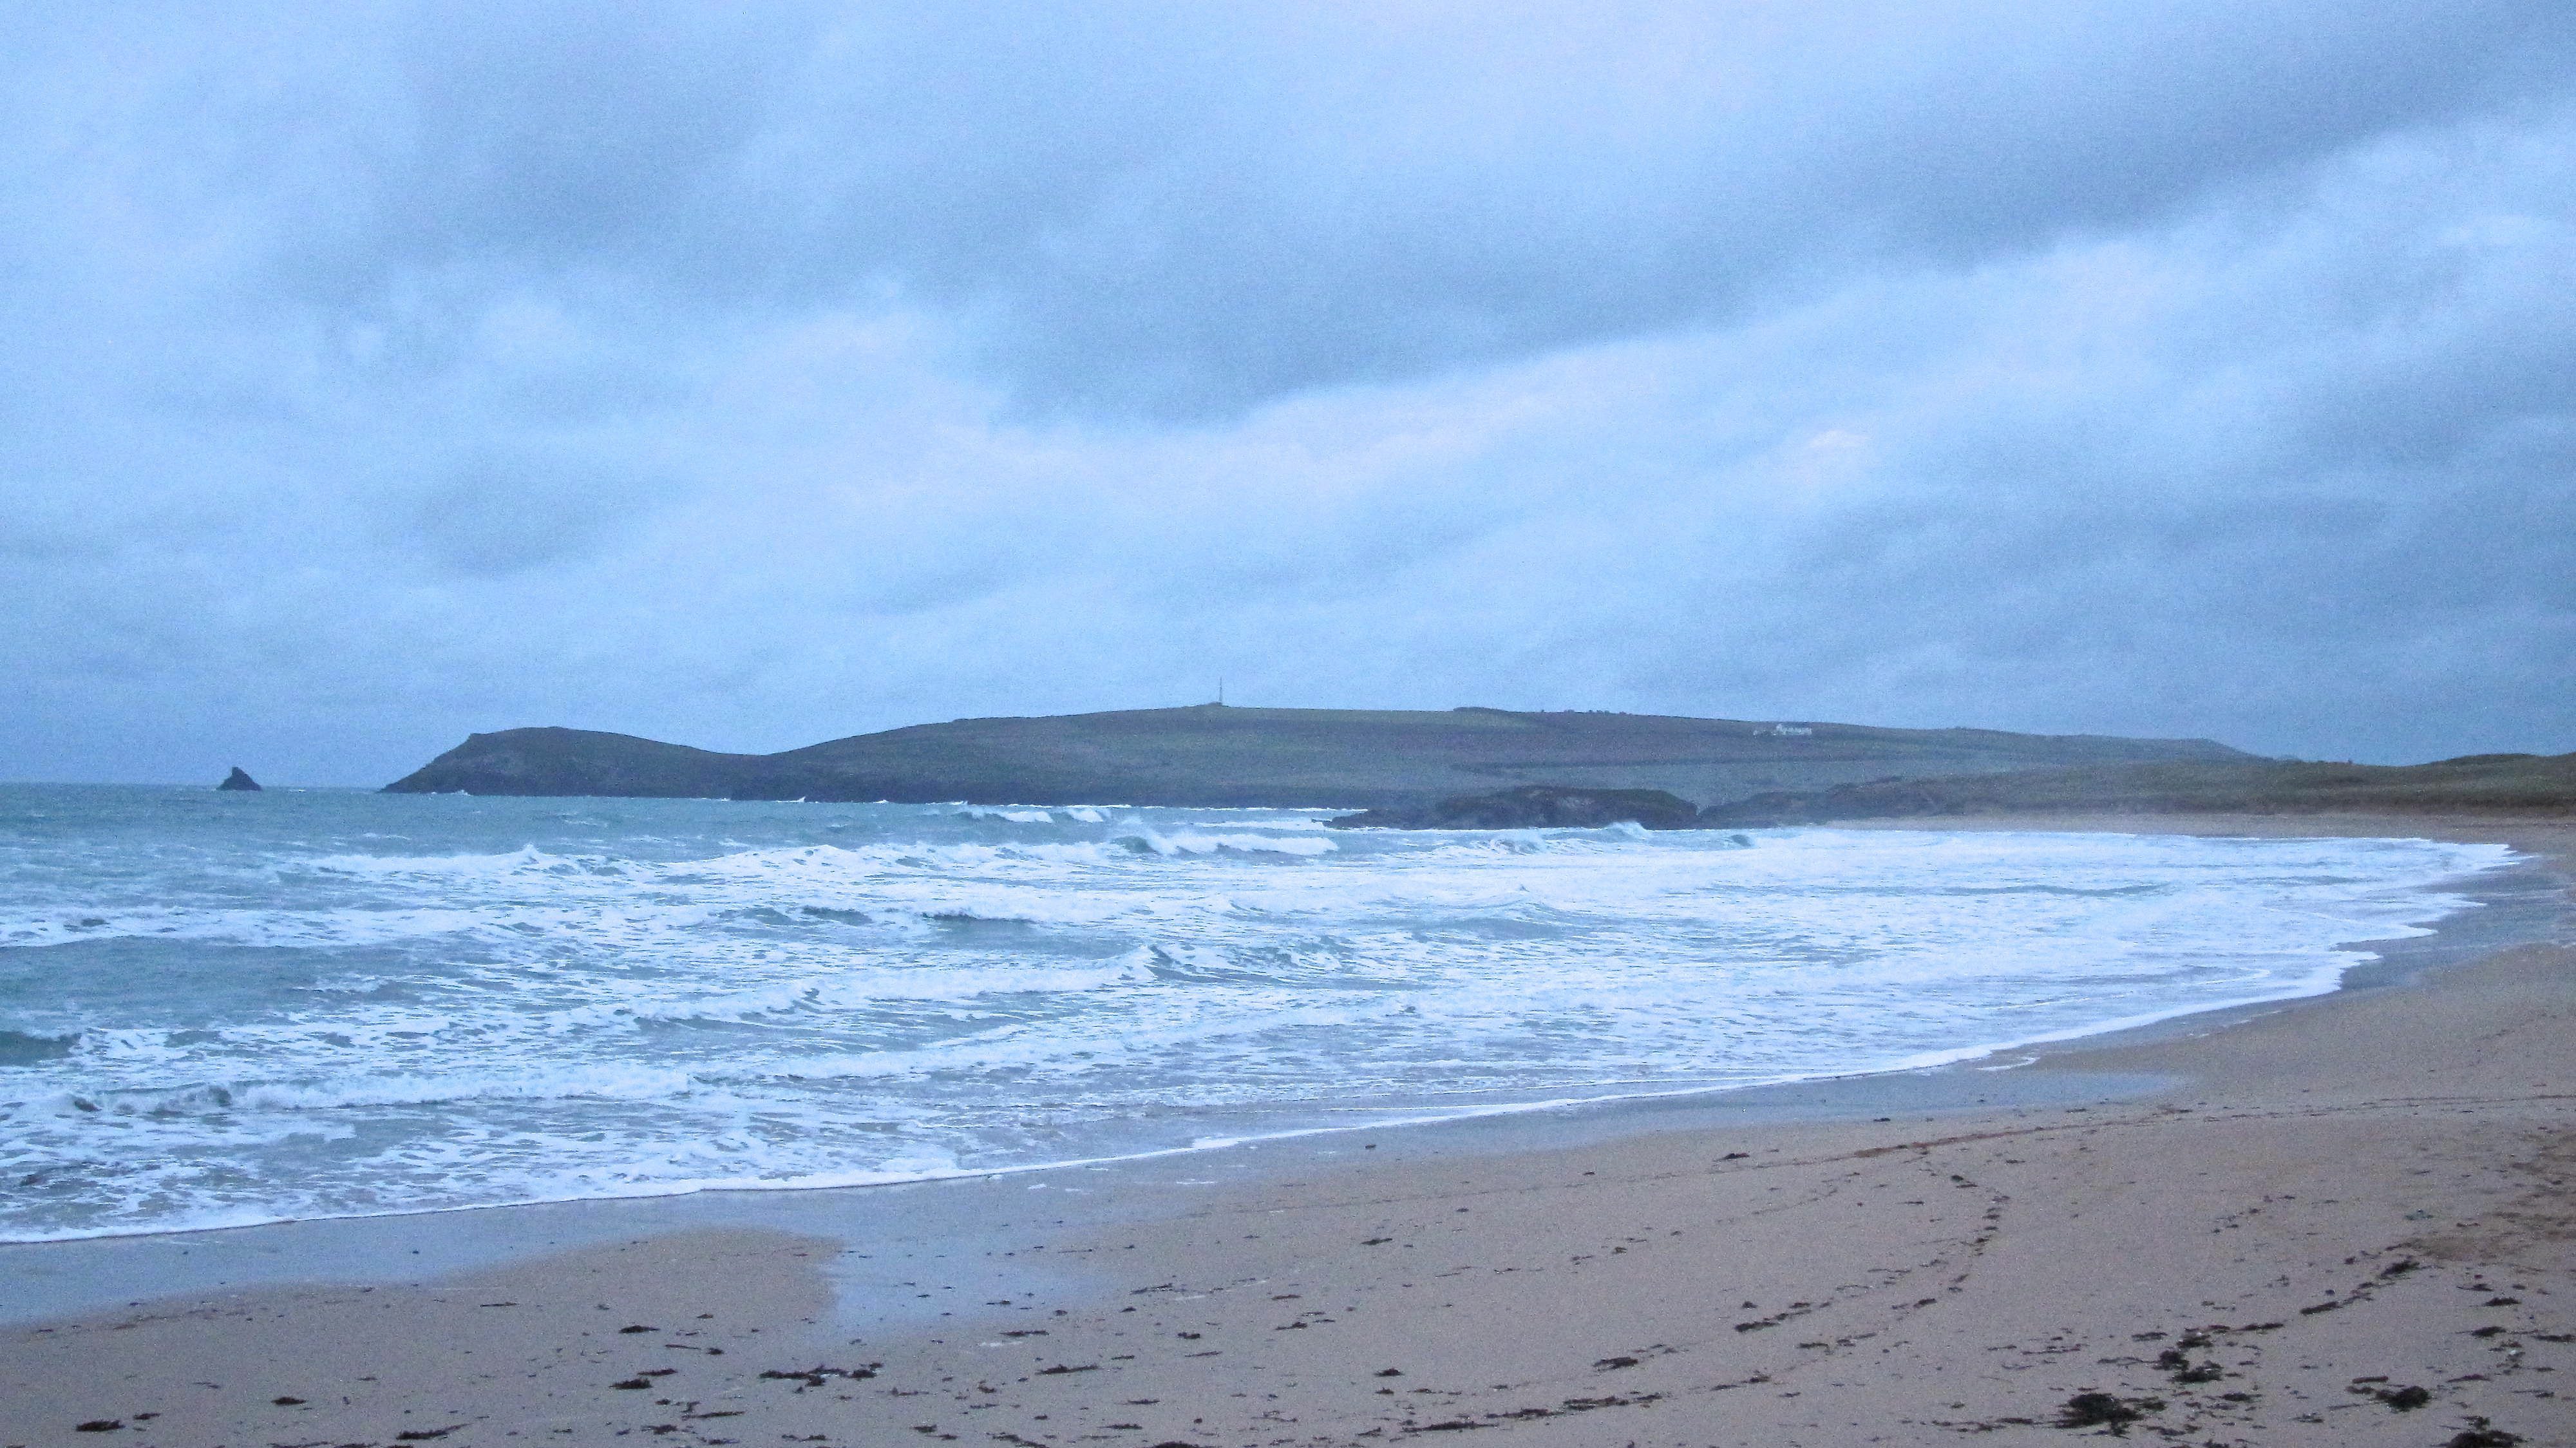 Surf Report for Tuesday 9th December 2014